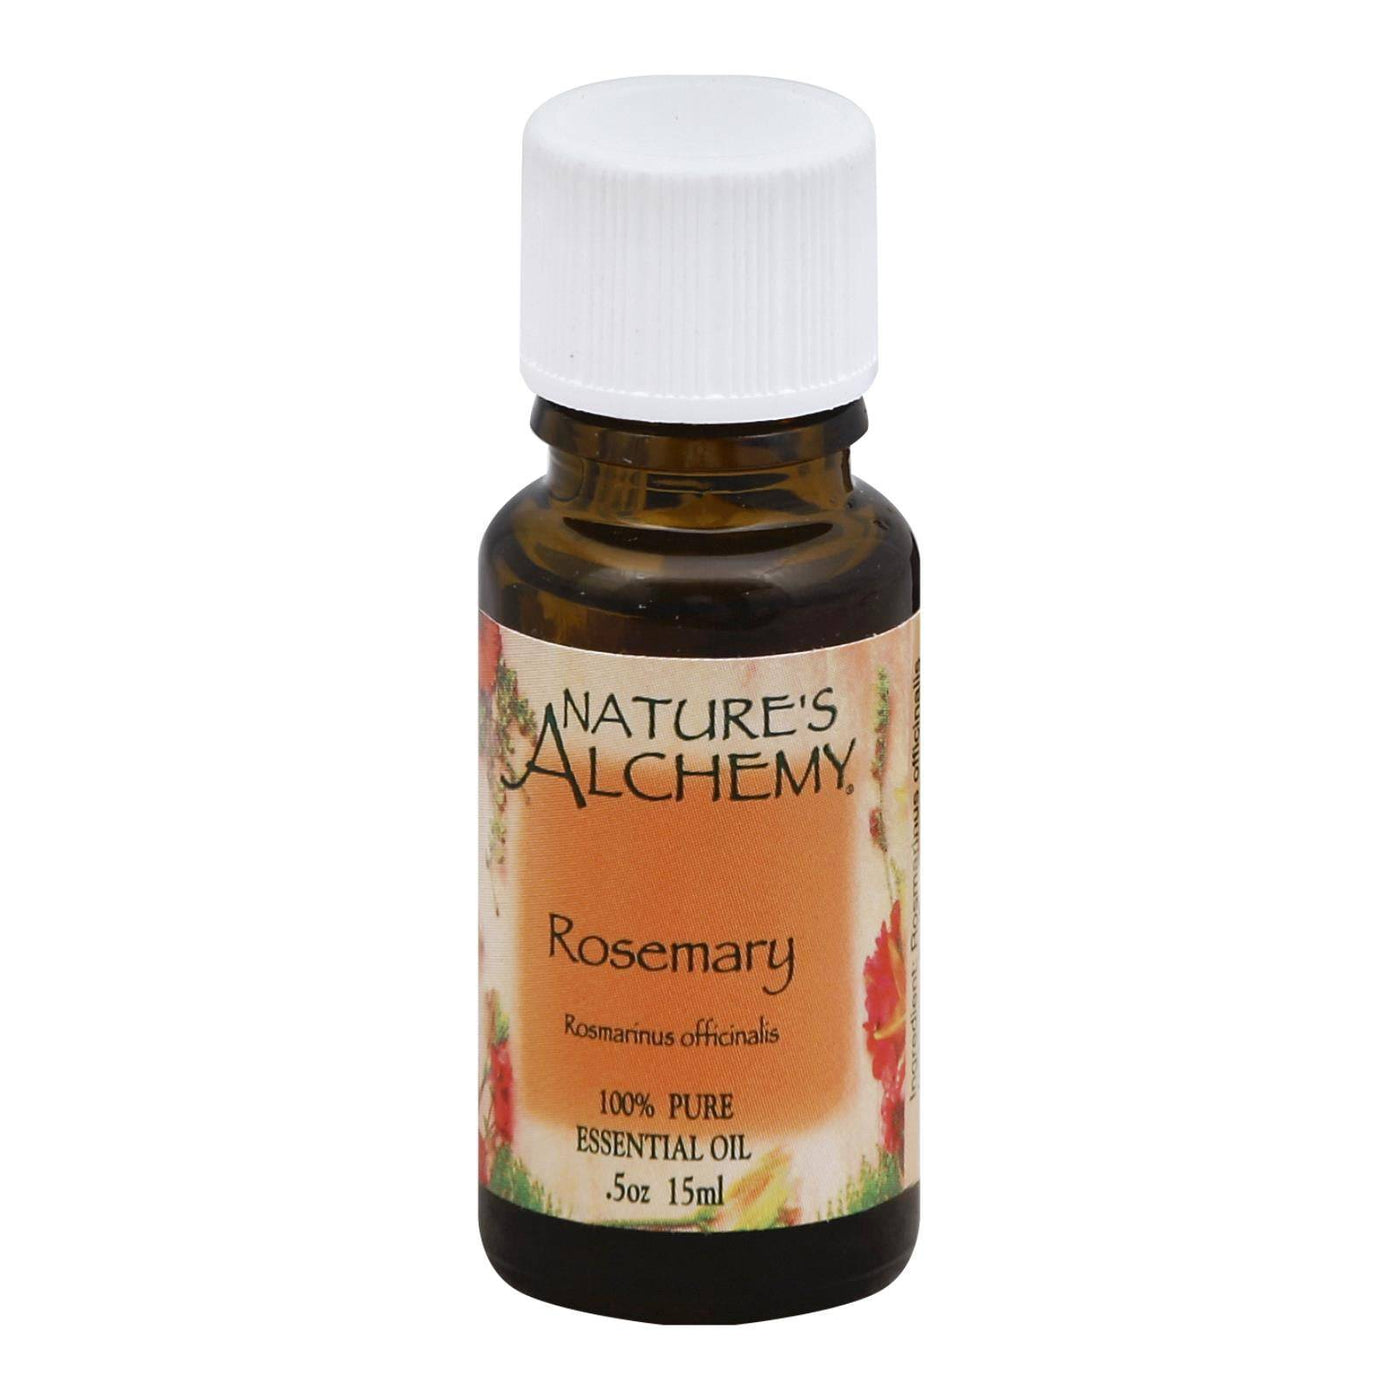 Nature's Alchemy 100% Pure Essential Oil Rosemary - 0.5 Fl Oz | OnlyNaturals.us